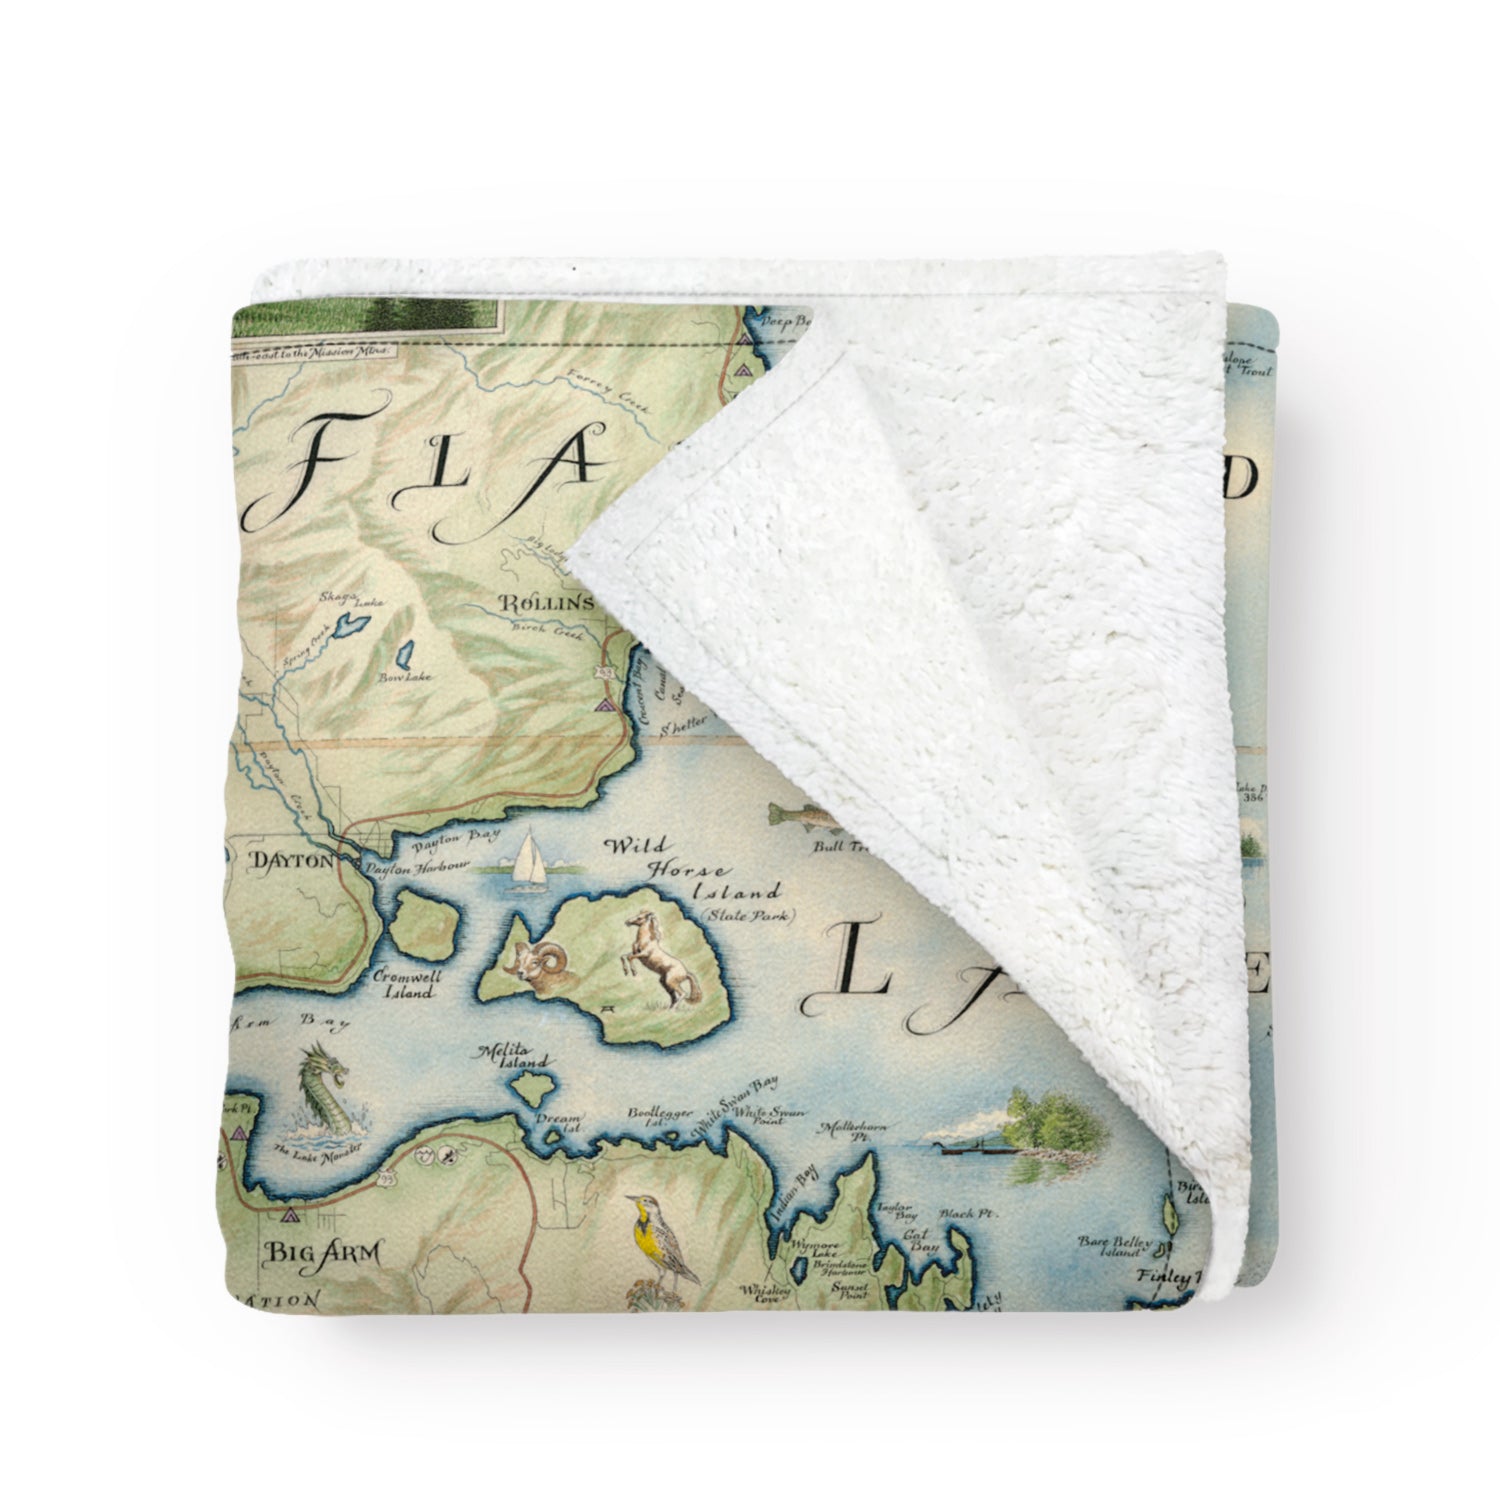 A folded blanket with a map of Flathead Lake in Montana on it. Hand-drawn artwork. Blanket measures 58